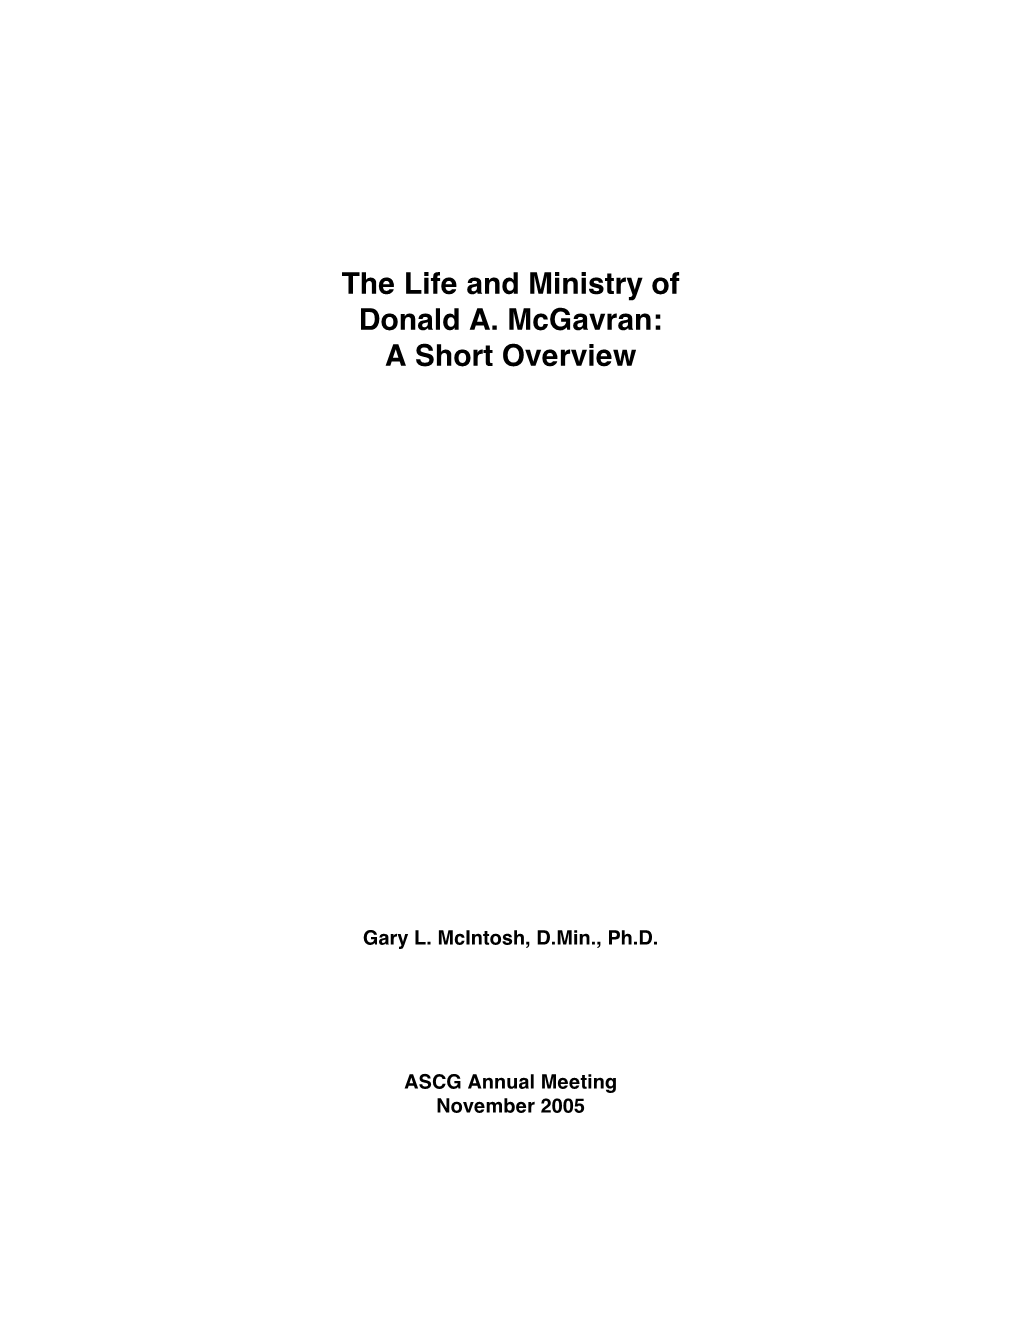 The Life and Ministry of Donald A. Mcgavran: a Short Overview